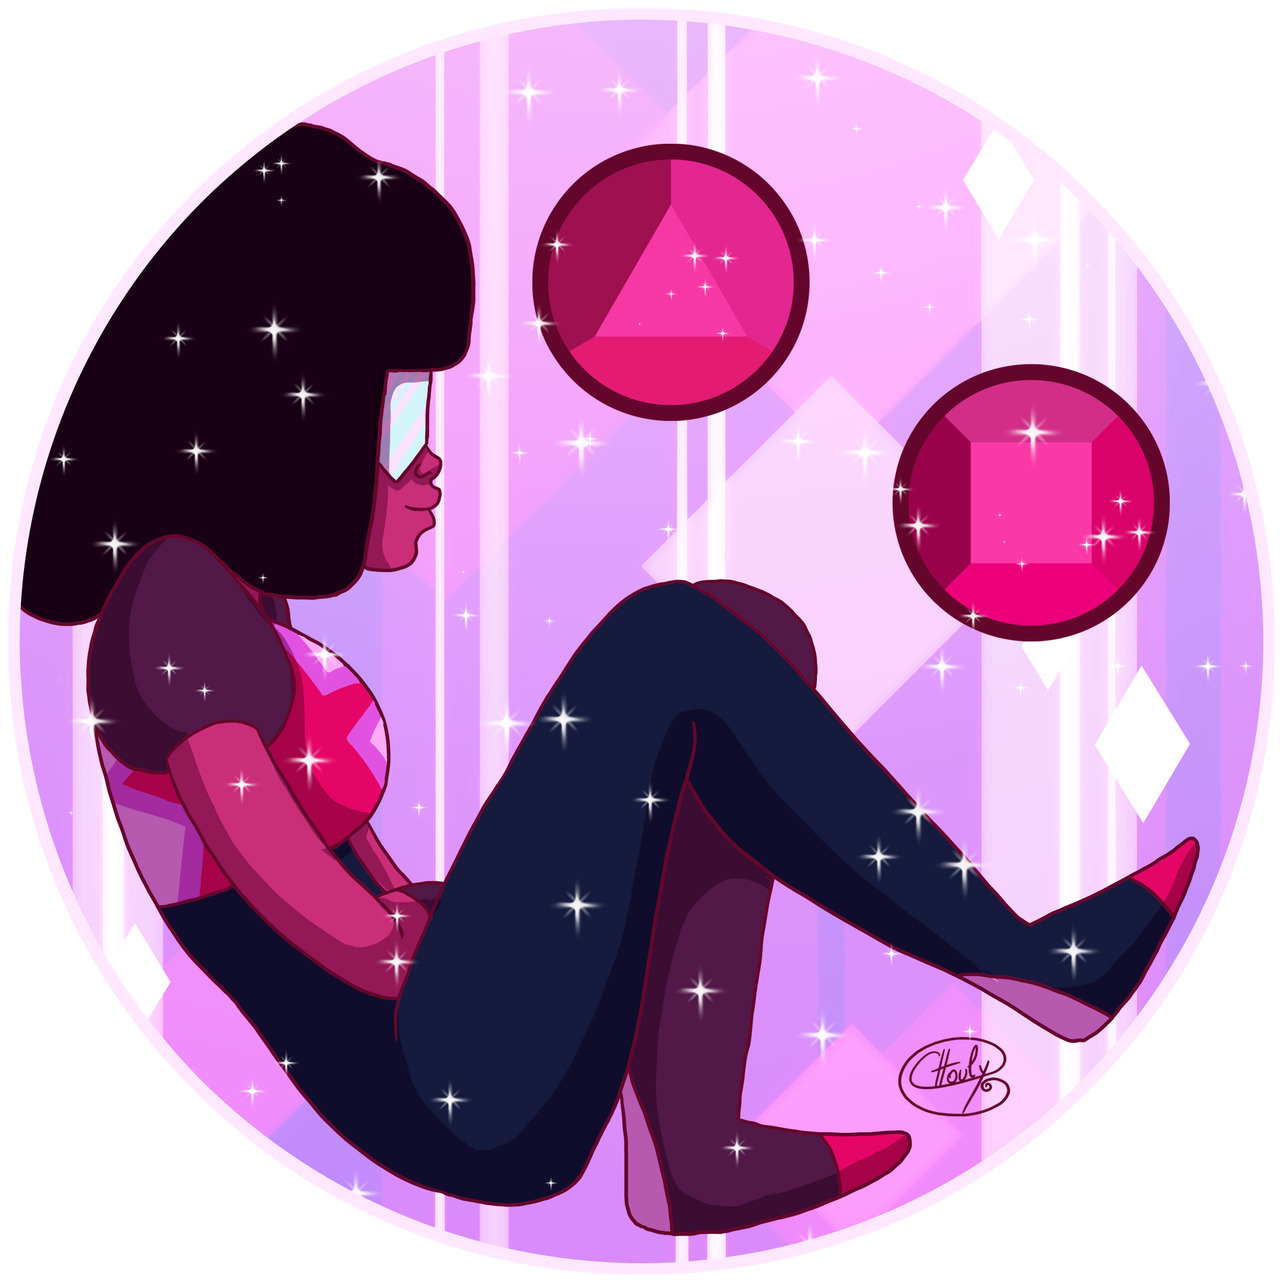 I prepare a new little something for Japan expo with the Crystal Gems. Hope the finish will be good